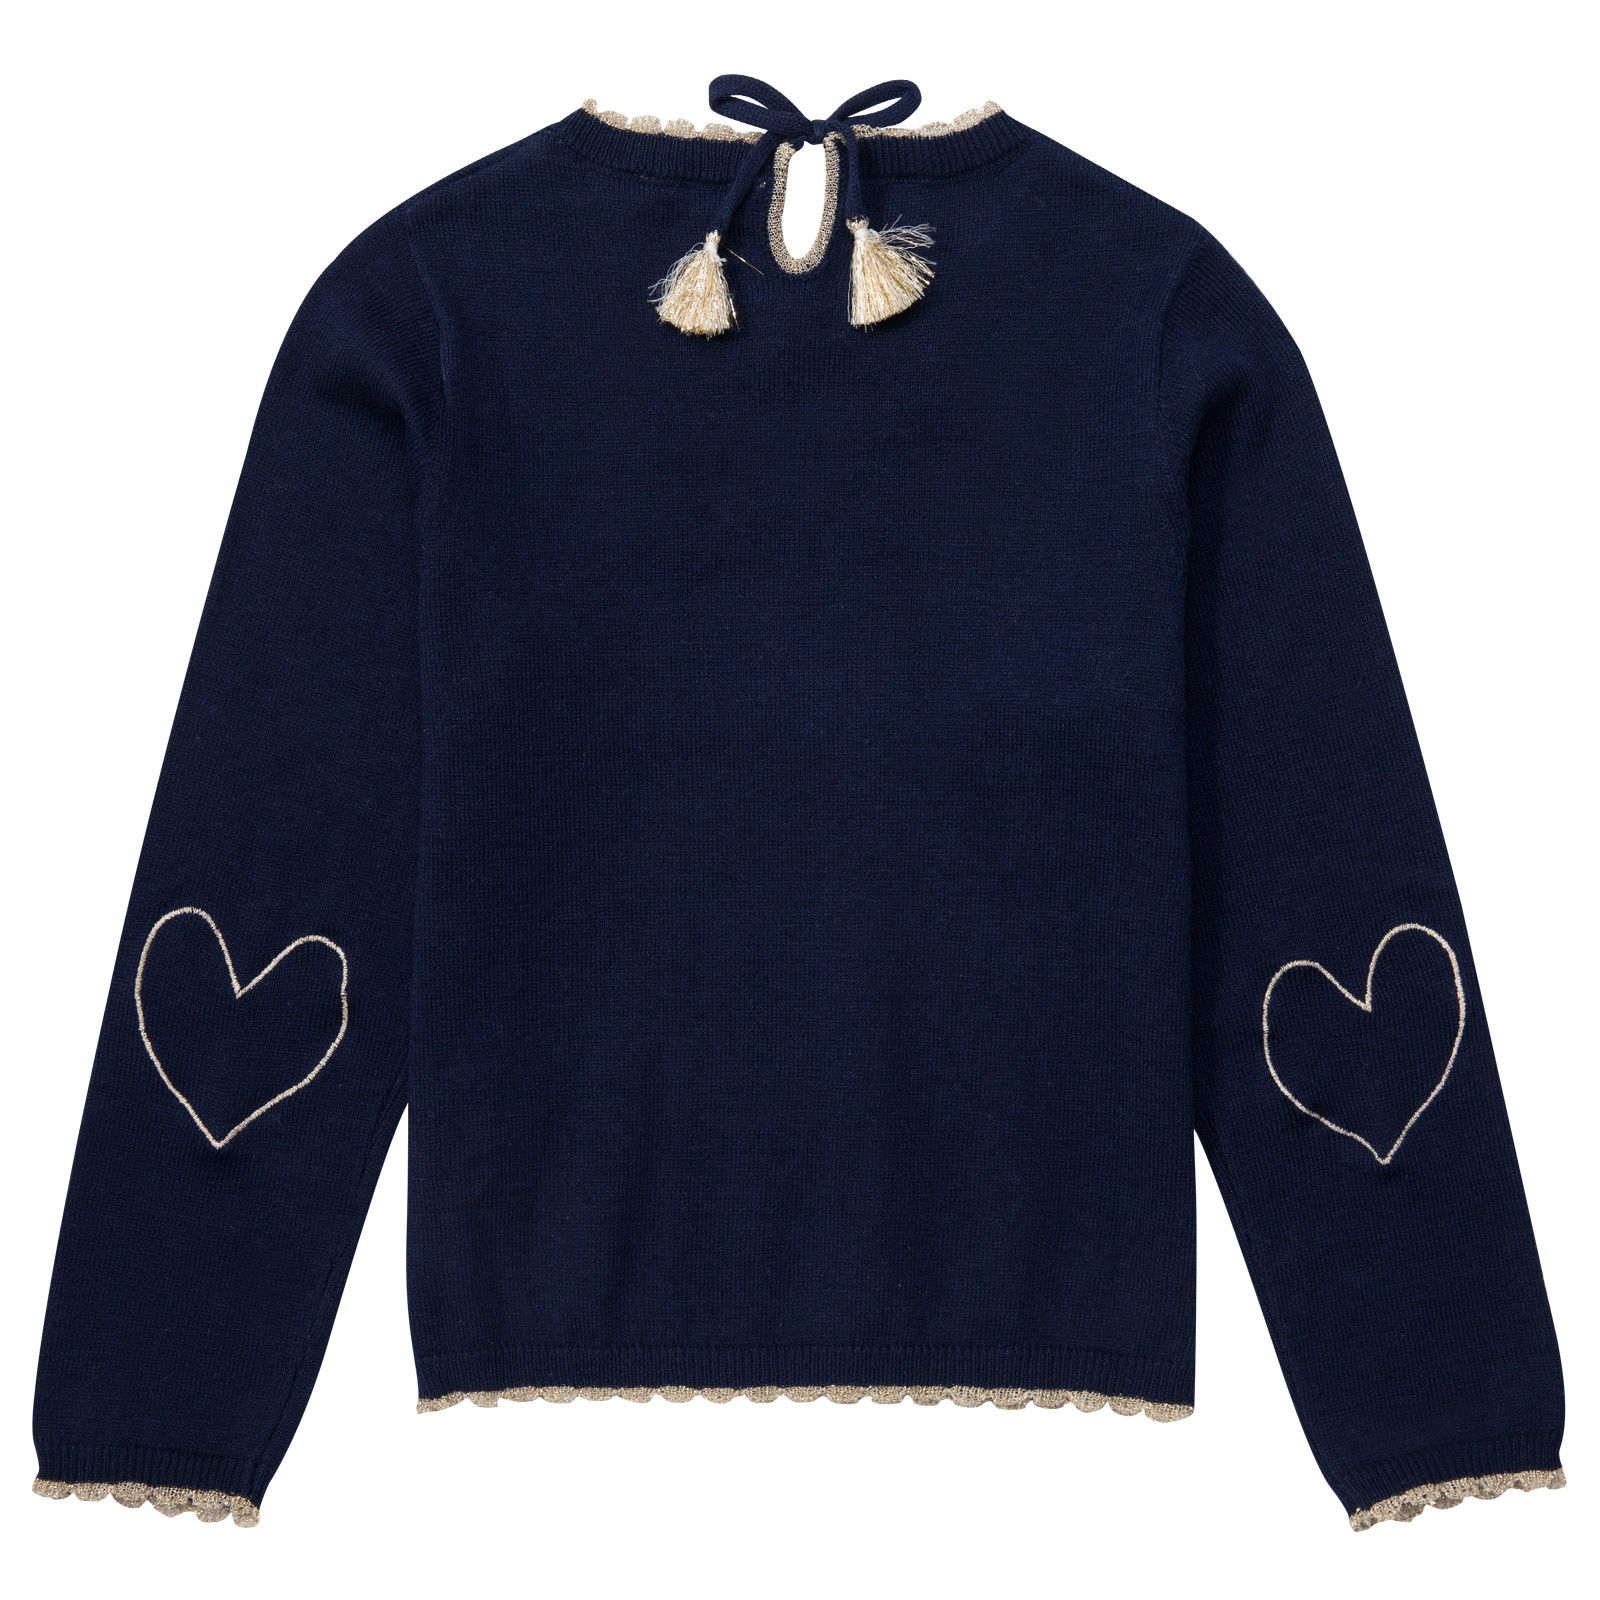 Girls Navy Blue Hearts Elbow Patches Sweater - CÉMAROSE | Children's Fashion Store - 2